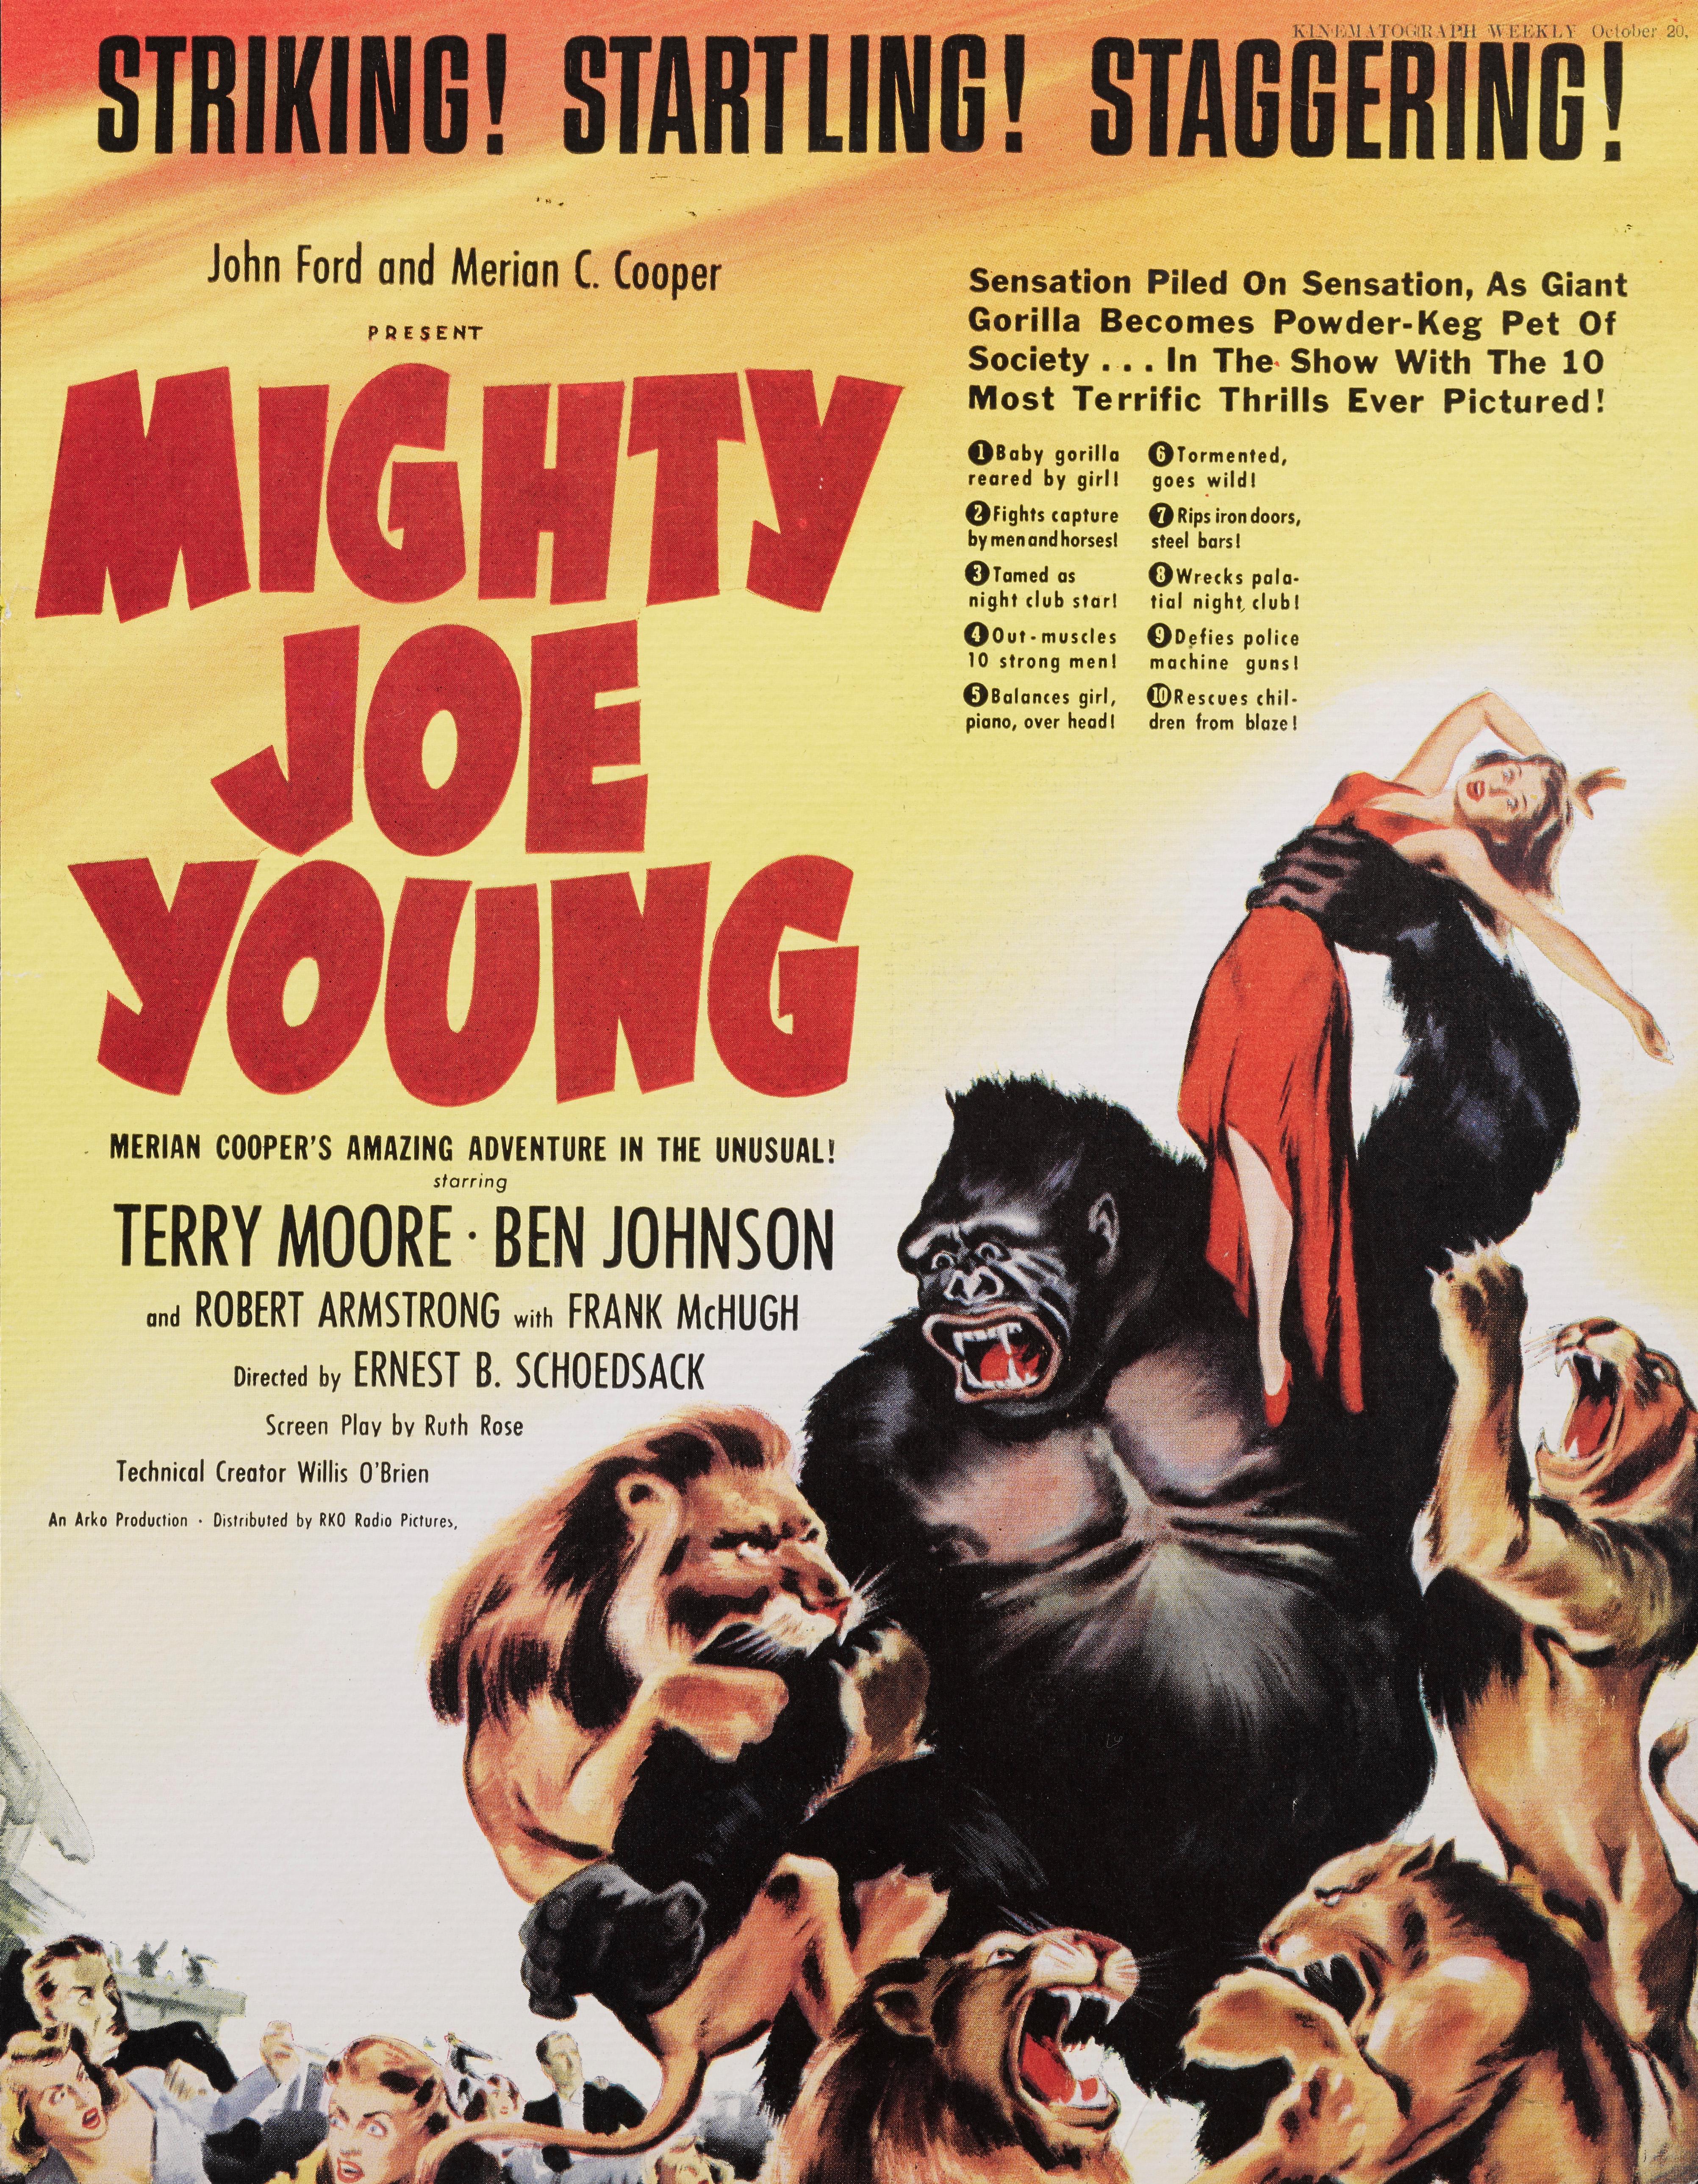 Original British trade advertisement for the 1949 Andventure, Fantasy film Mighty Joe Young.
The film was directed by Ernest B. Schoedsack and stared Terry Moore, Ben Johnson.
The piece is conservation paper backed and would be sent out flat.